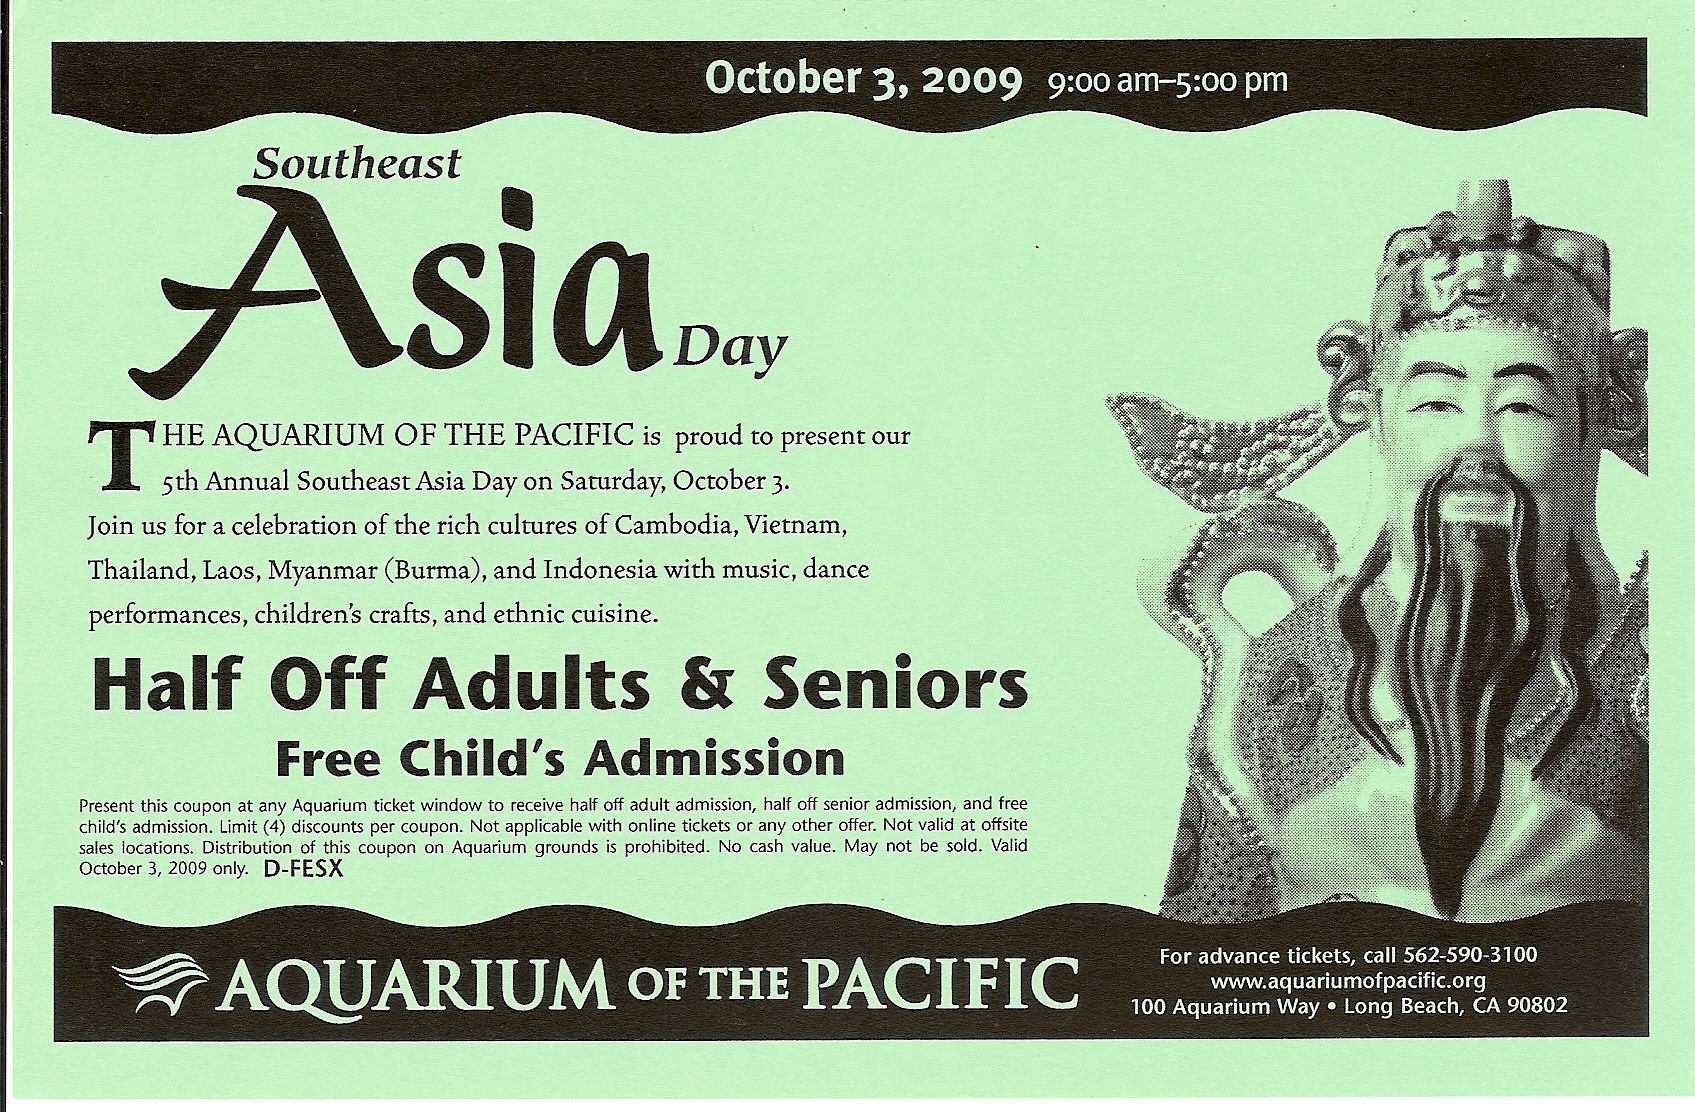 Southeast Asia Day, Aquarium of the Pacific